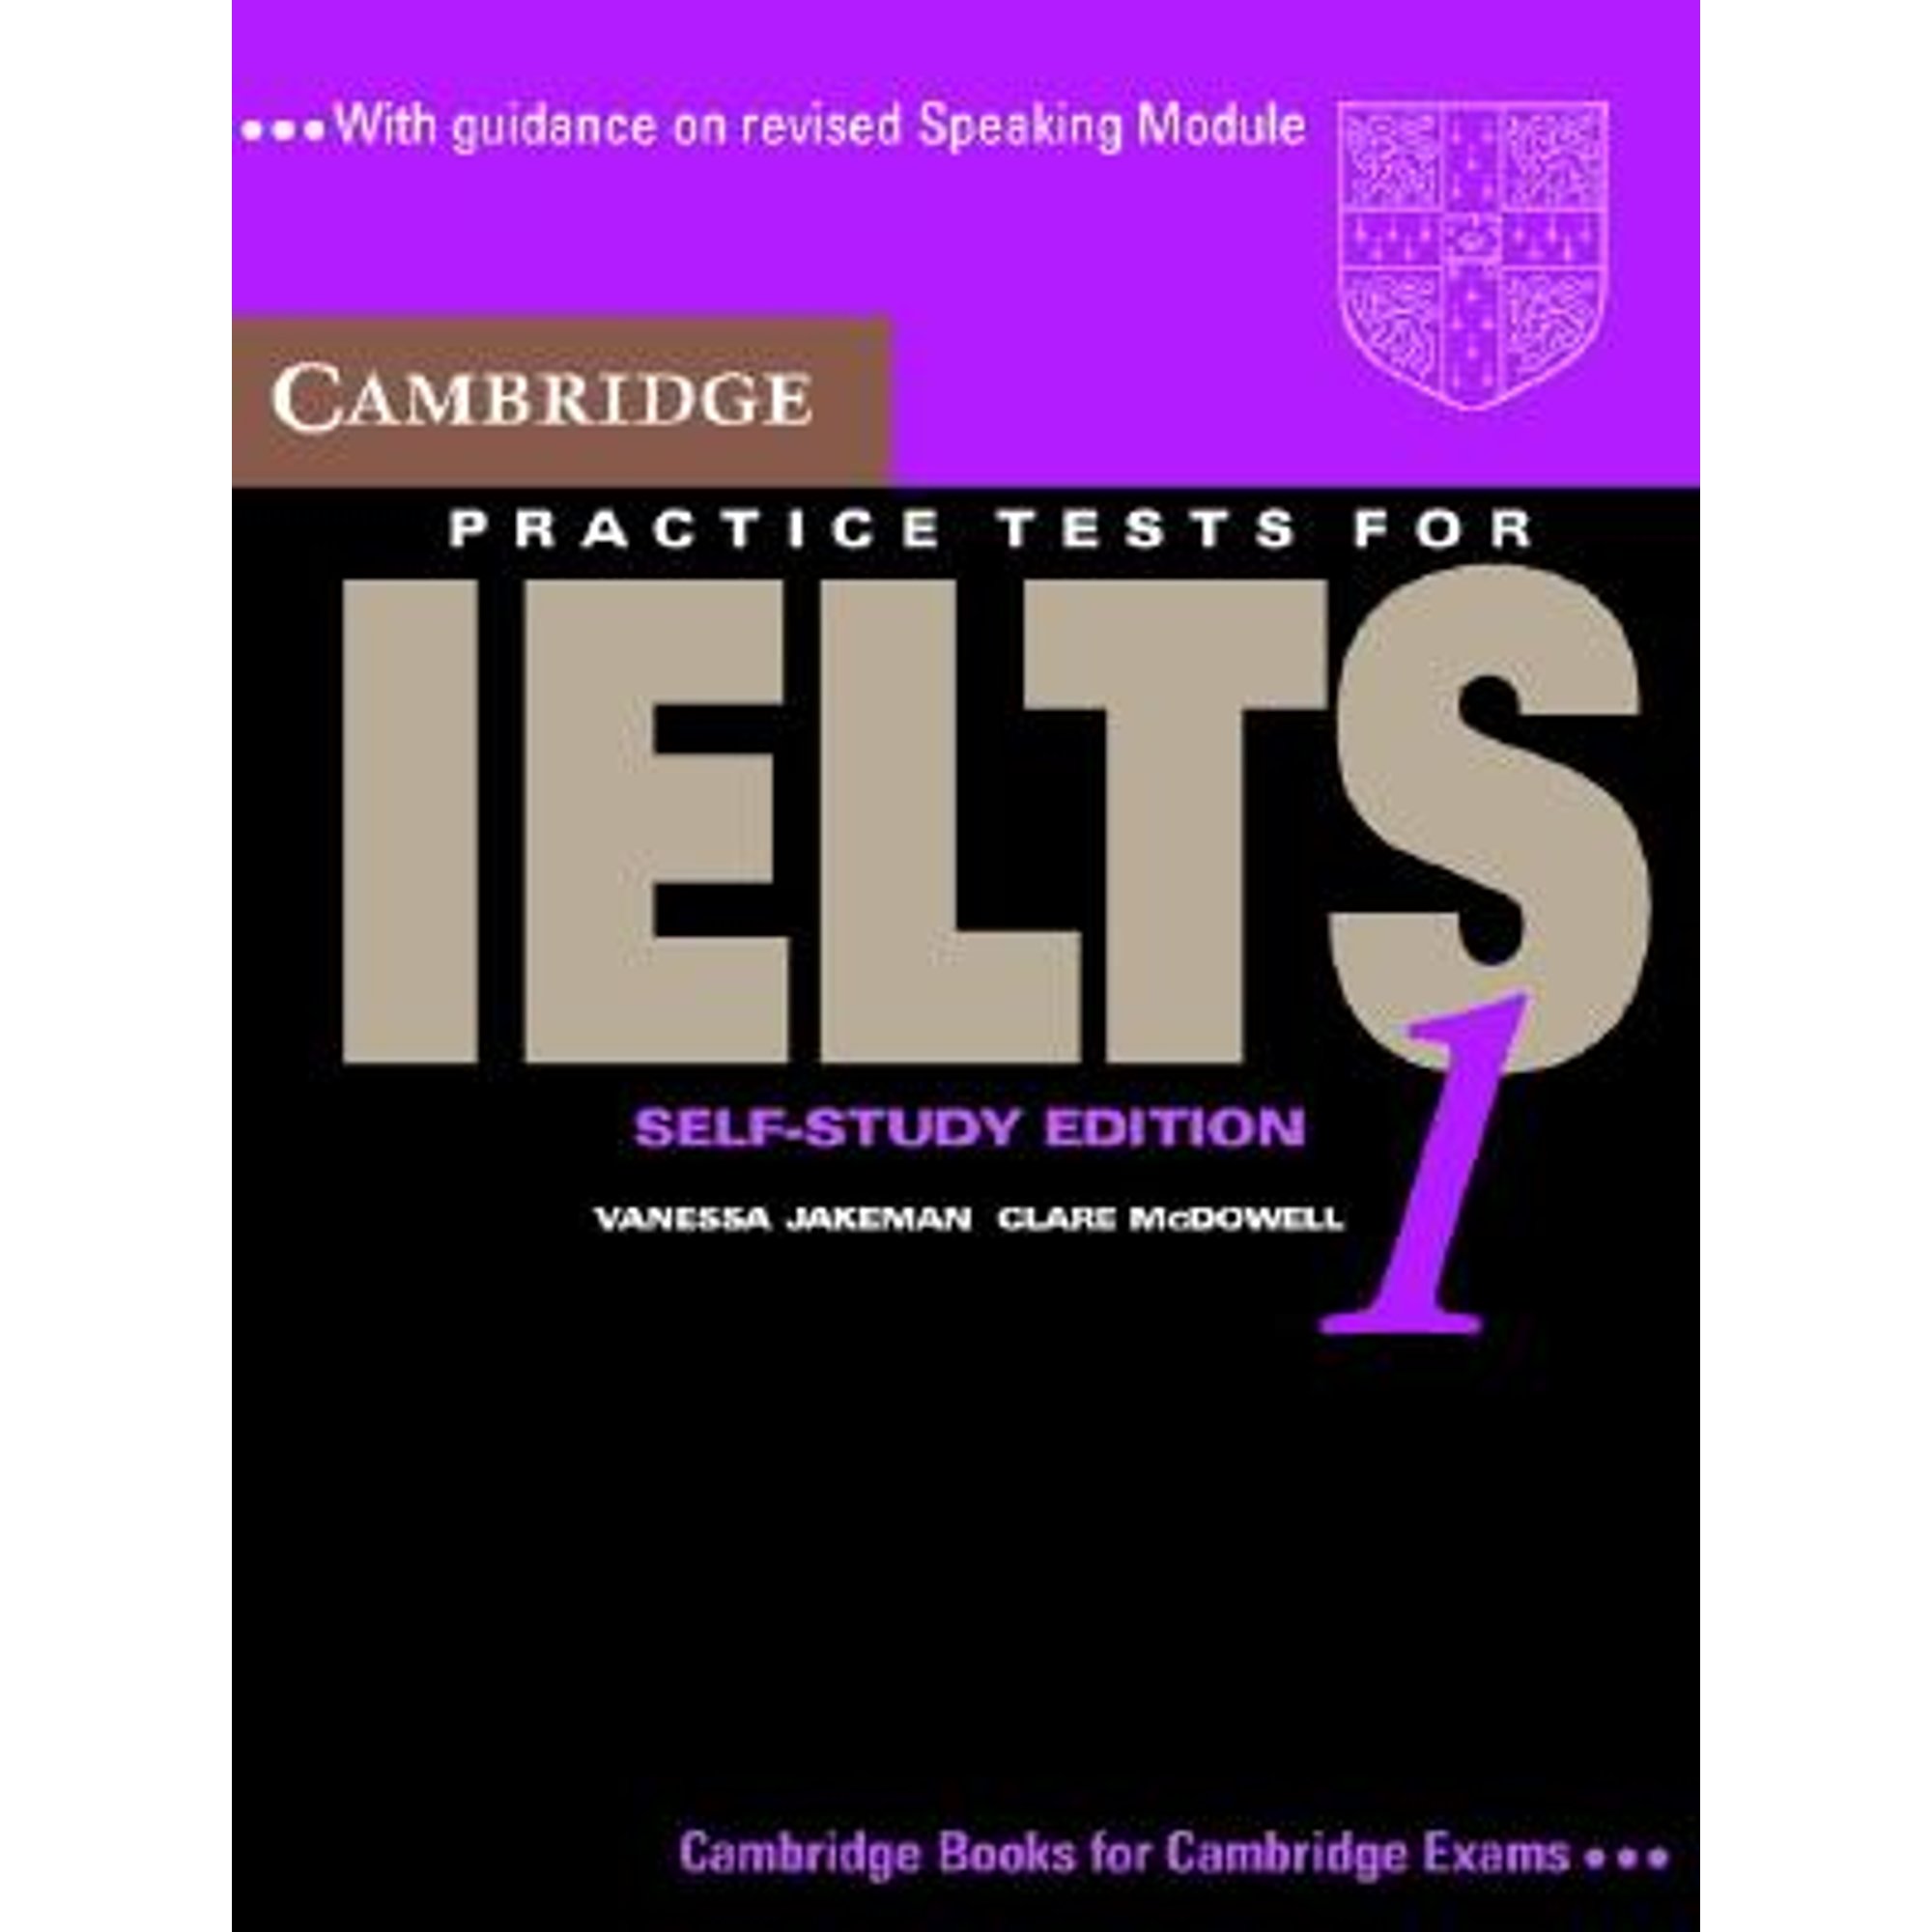 9780521497671)　Self-study　Vanessa　by　Student's　Pre-Owned　(Paperback　for　Tests　Book　Cambridge　IELTS　Clare　Practice　Jakeman,　McDowell